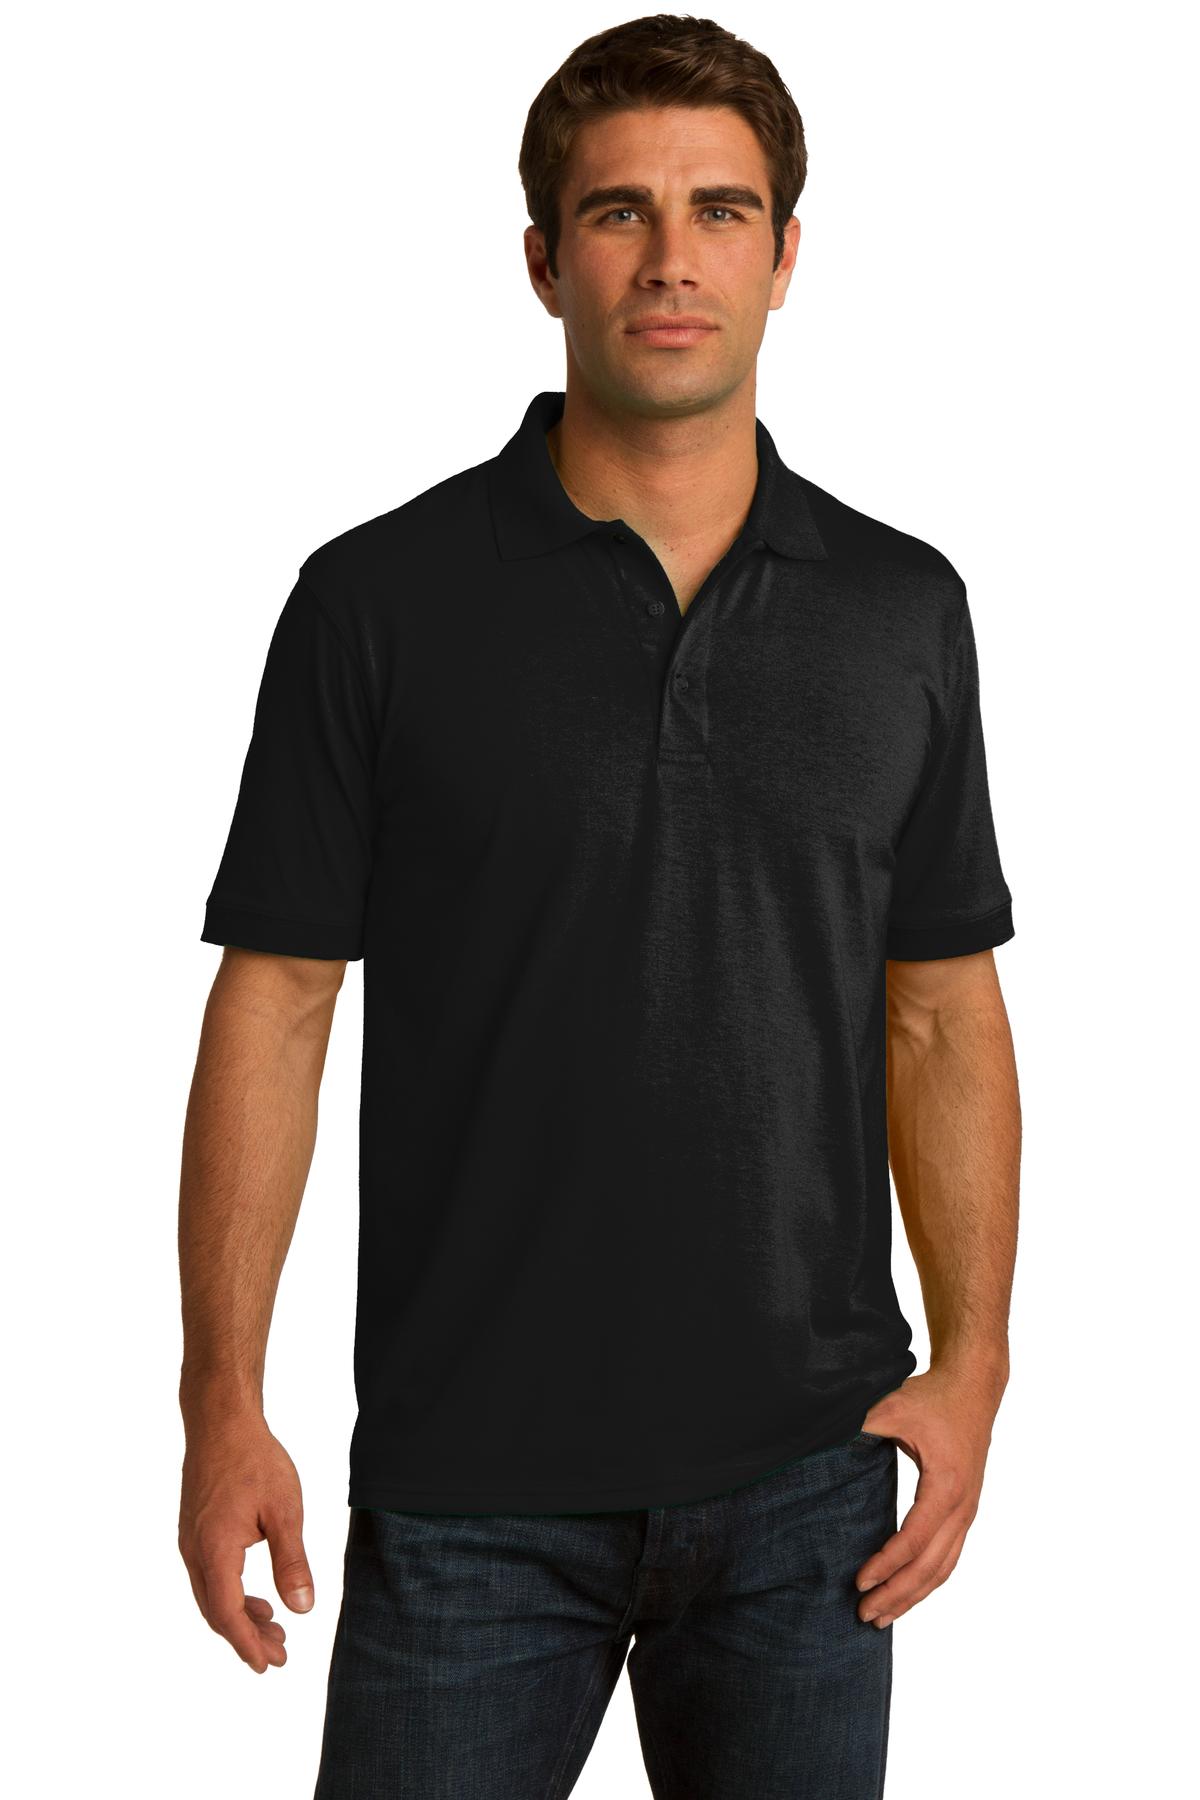 Port and Company Tall Core Blend Jersey Knit Polo. KP55T